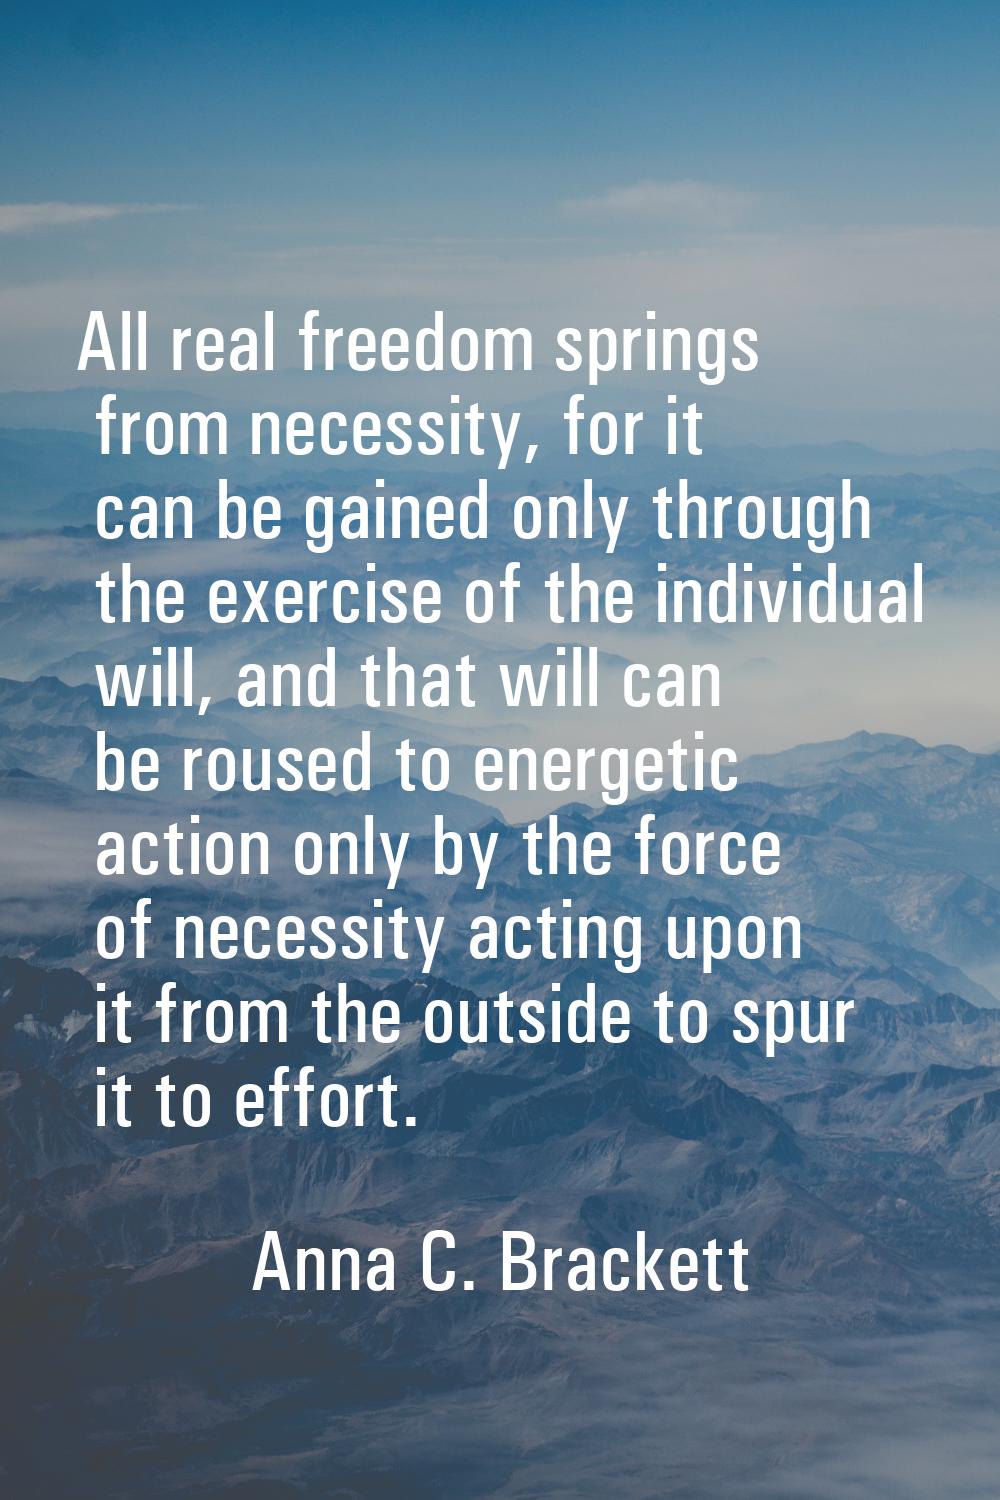 All real freedom springs from necessity, for it can be gained only through the exercise of the indi